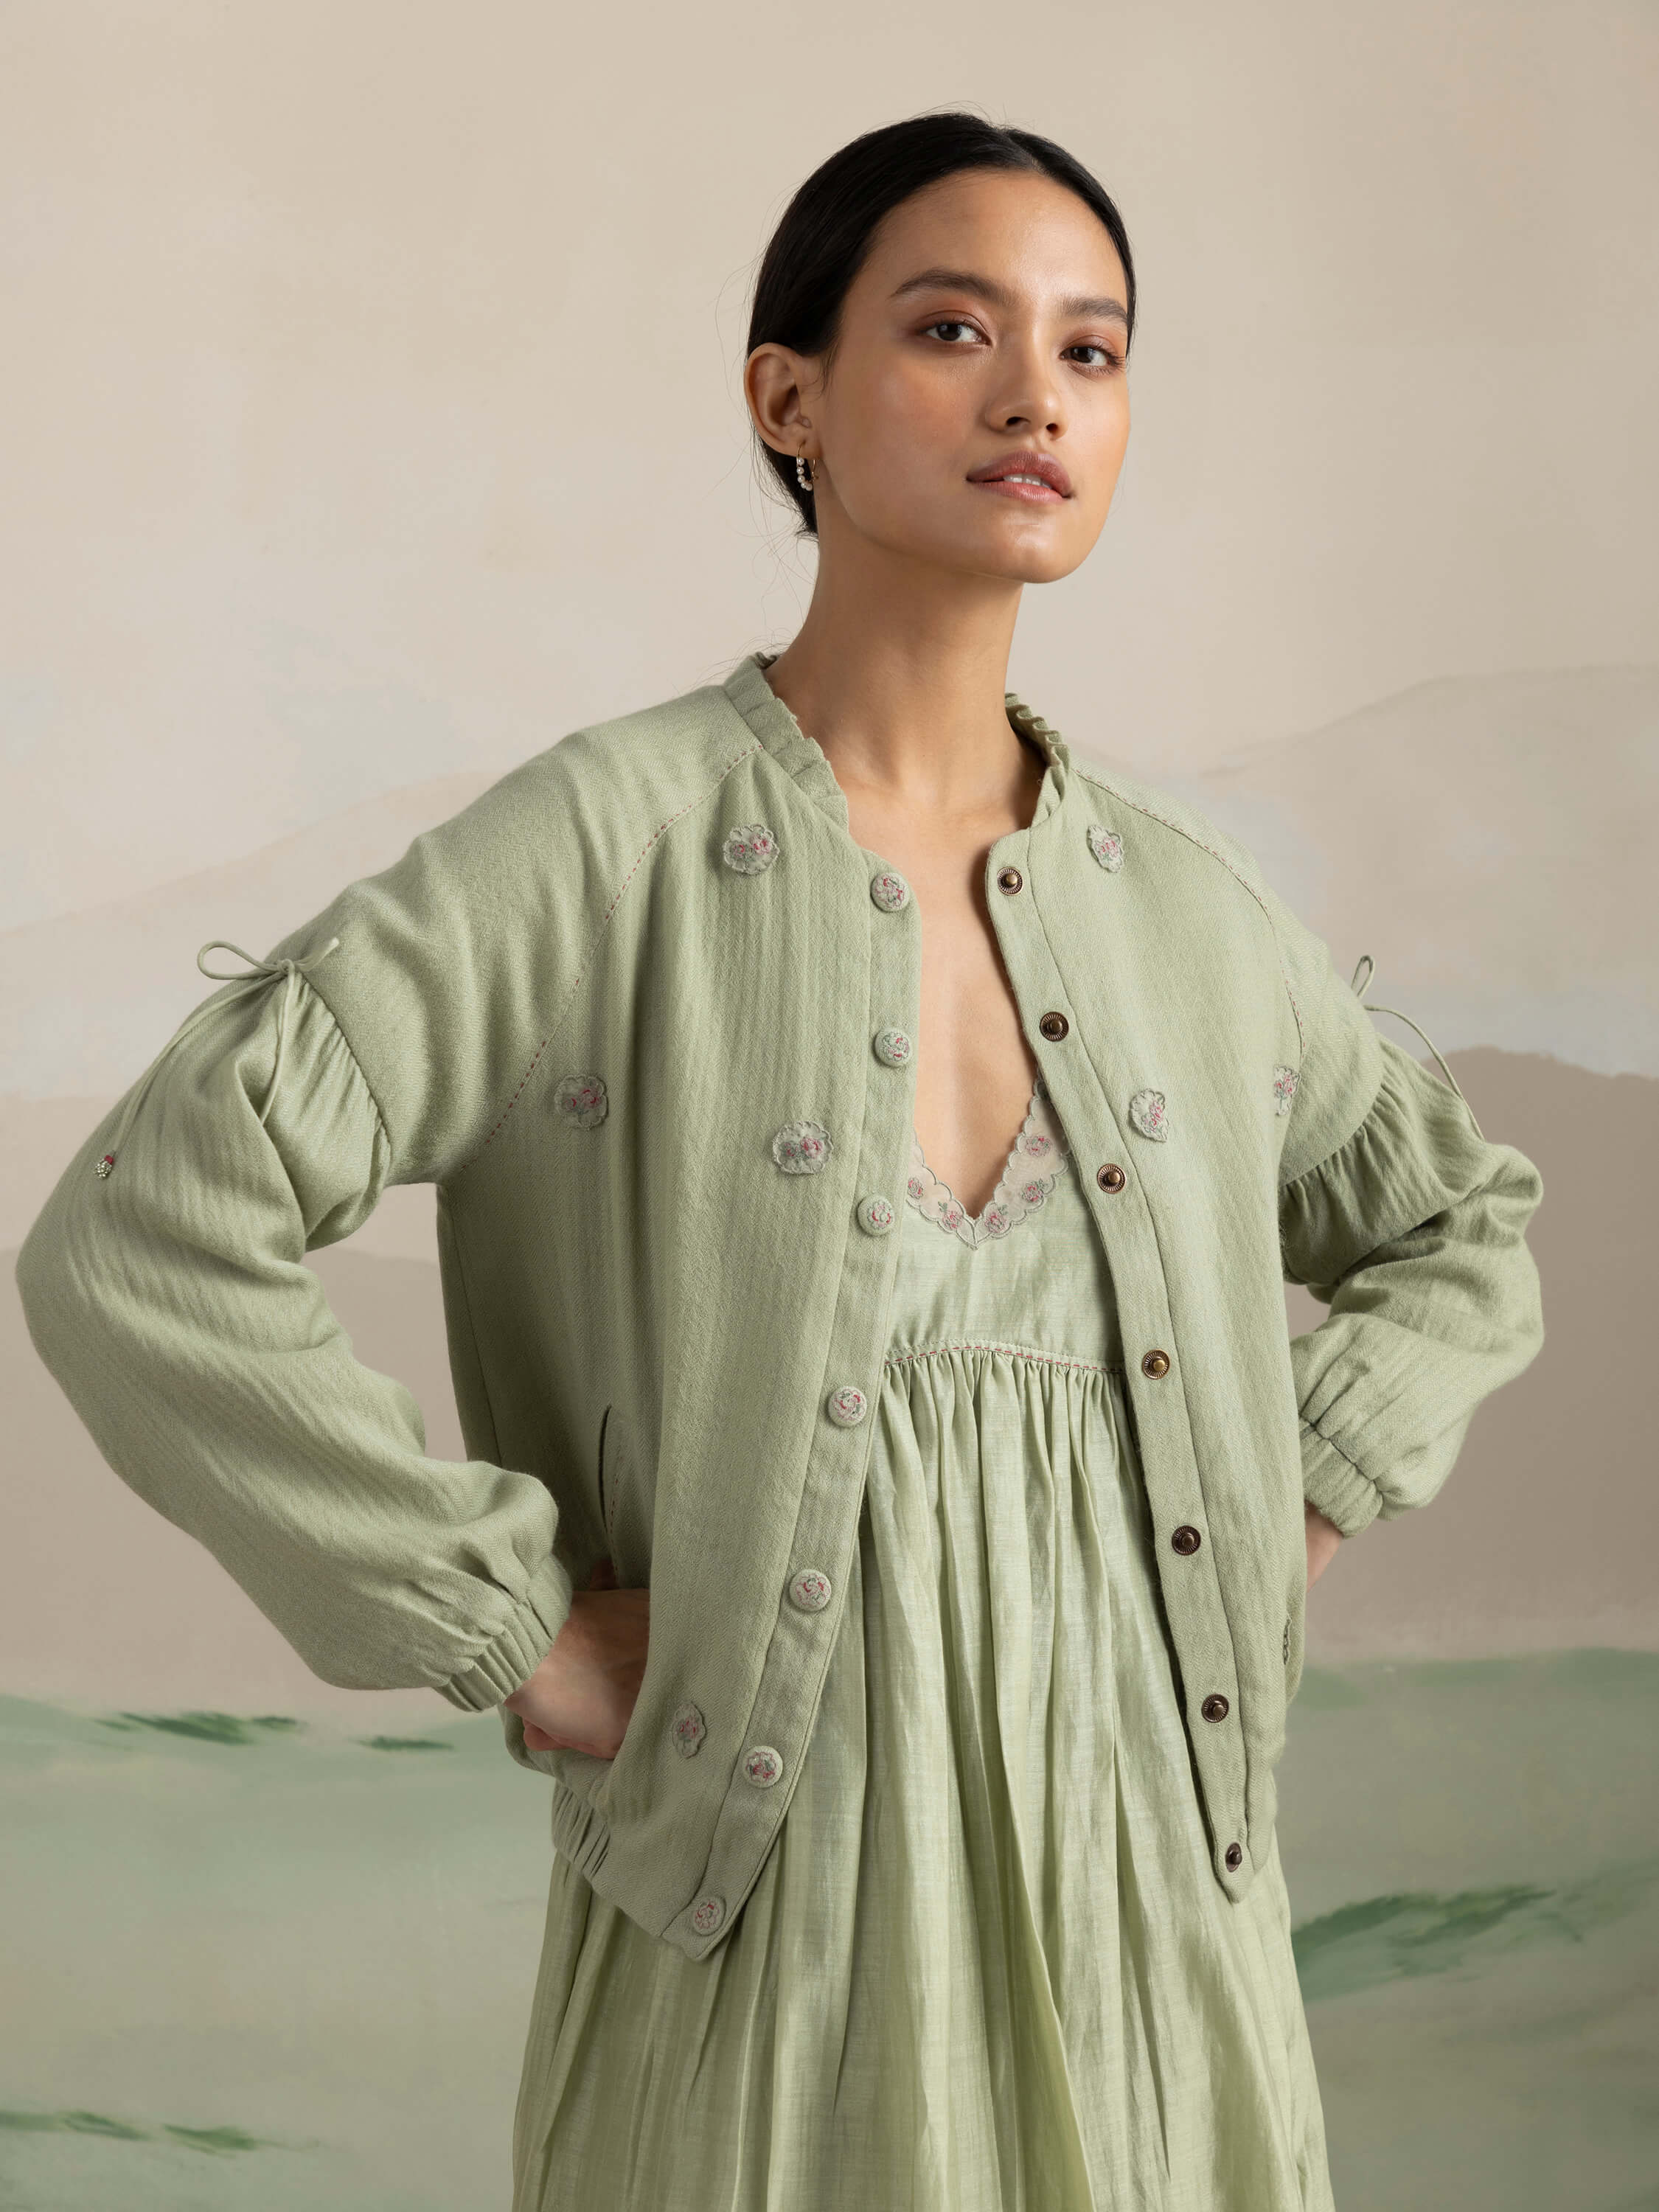 Woman modeling green button-up jacket and dress combo in minimalist setting.